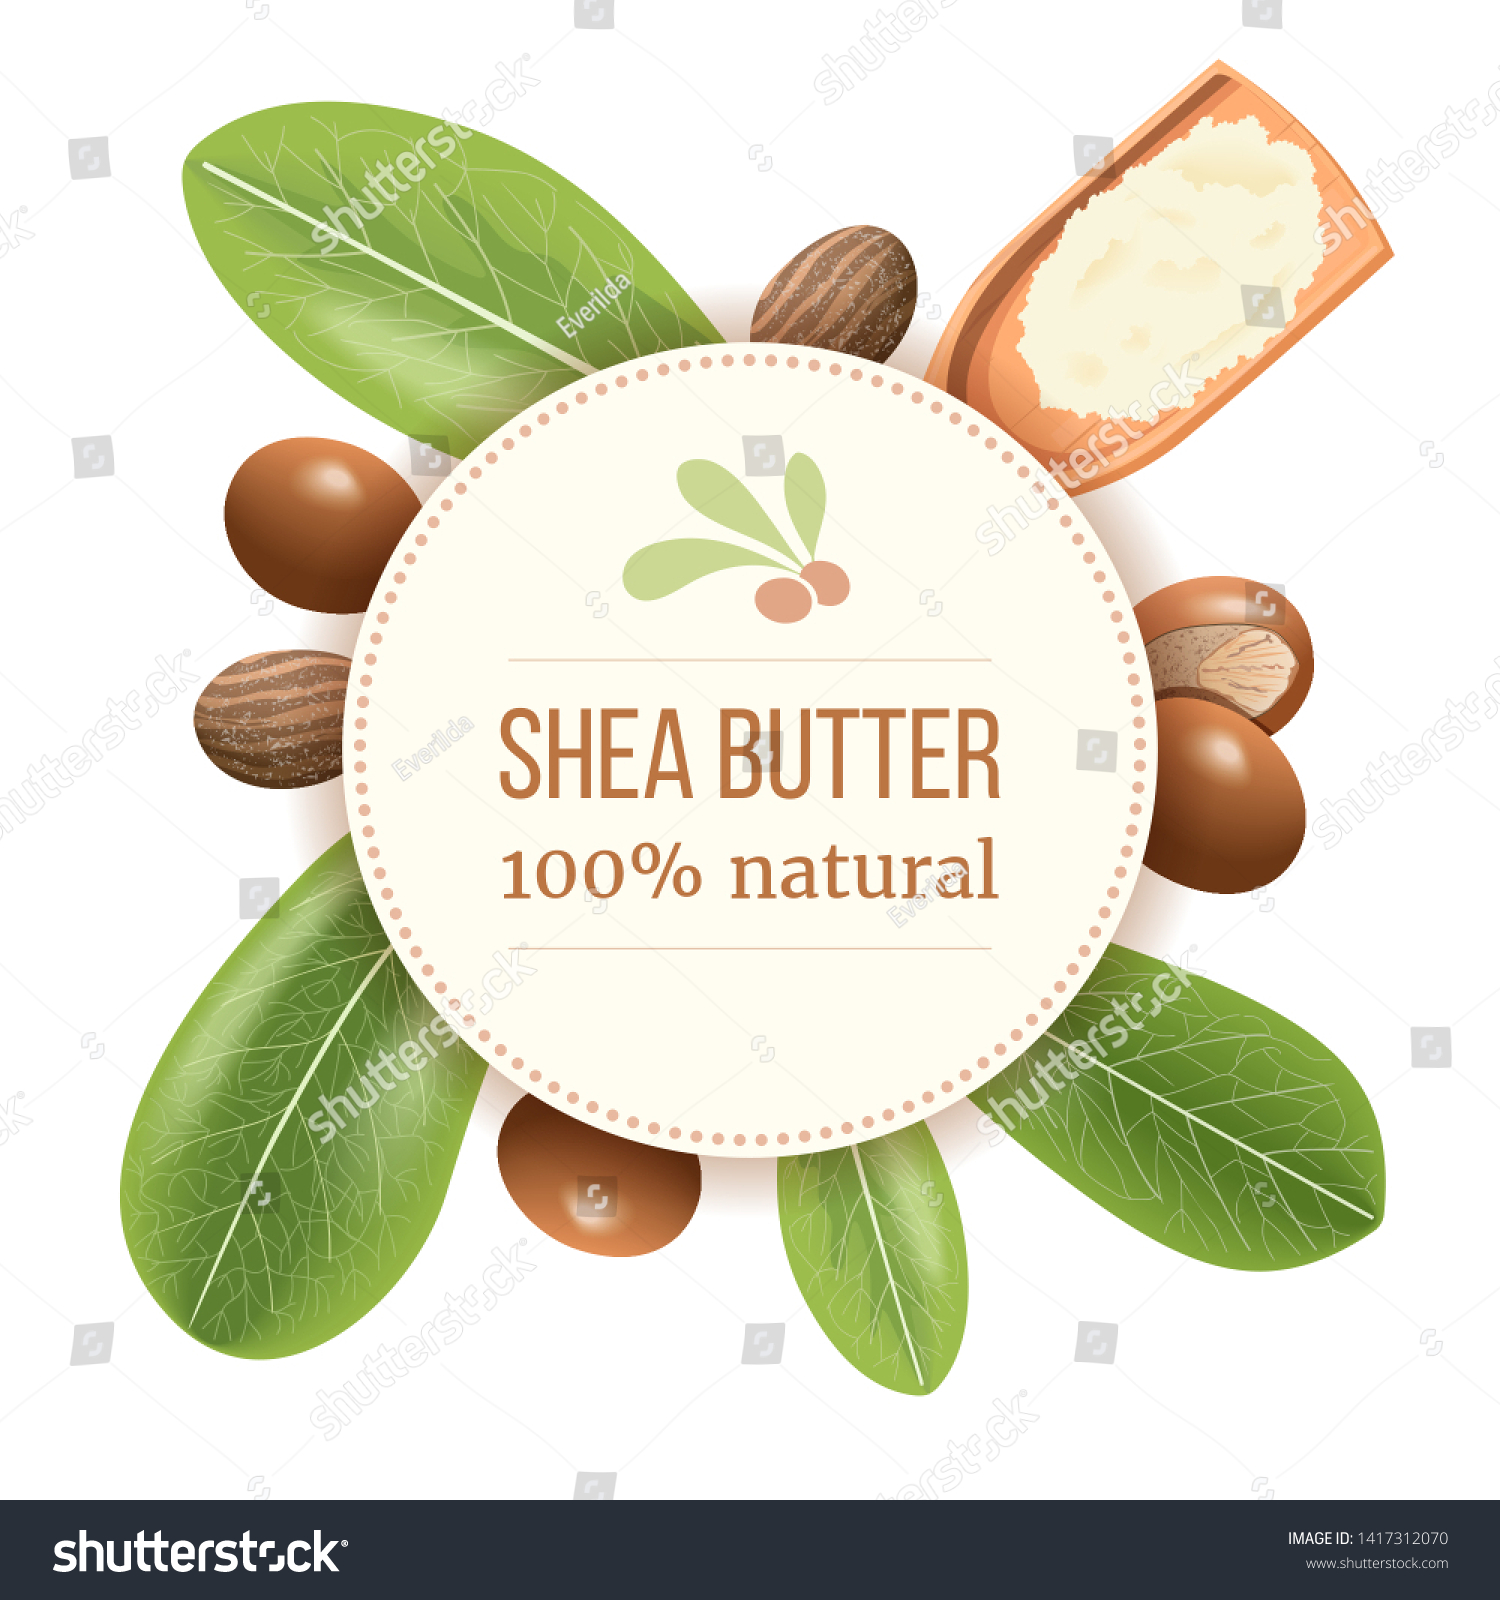 SVG of Ripe shea nuts and leaf Round Circle badge. shi tree pods whole and cracked. Vitellaria paradoxa. Card template copy space. for cooking, cosmetics, aromatherapy, perfume, food, healthcare, ointments svg